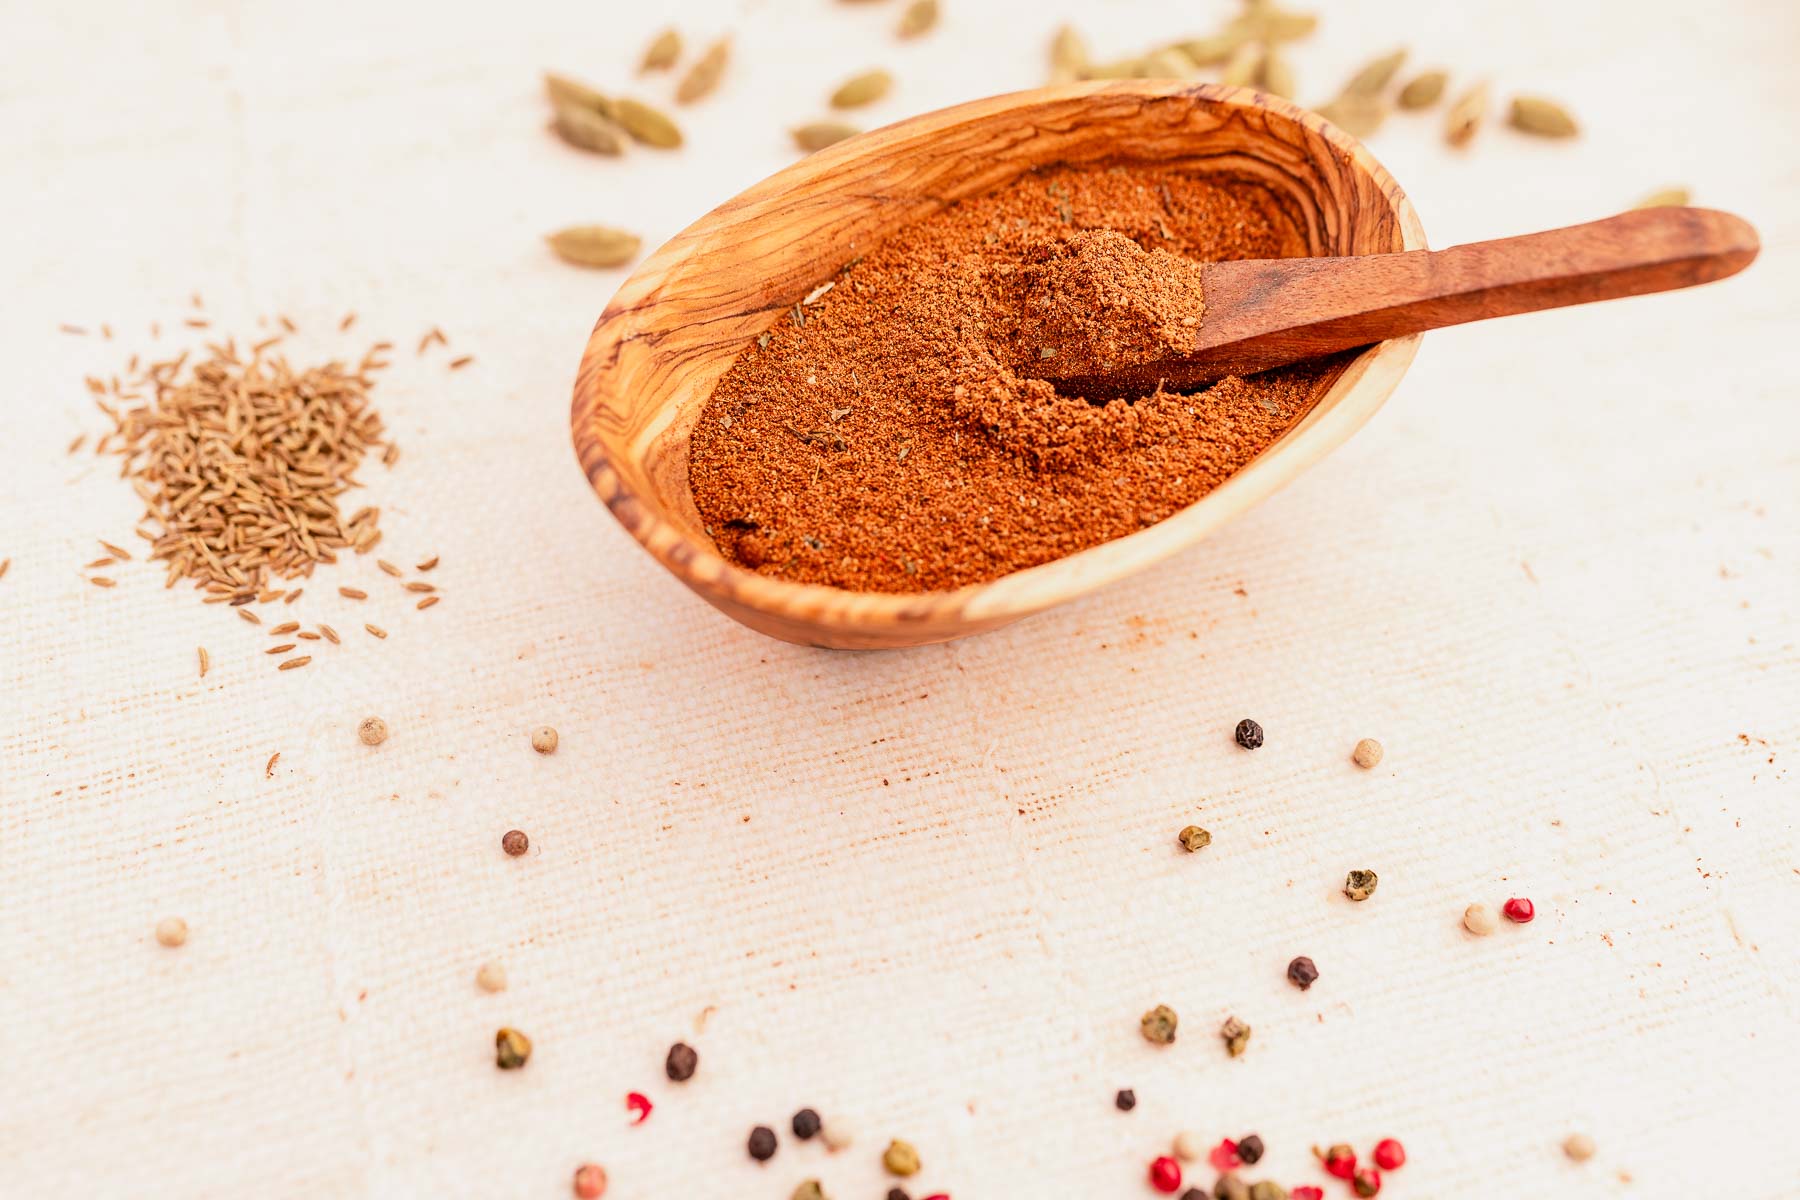 Baharat spices in a wooden bowl with a wooden spoon.